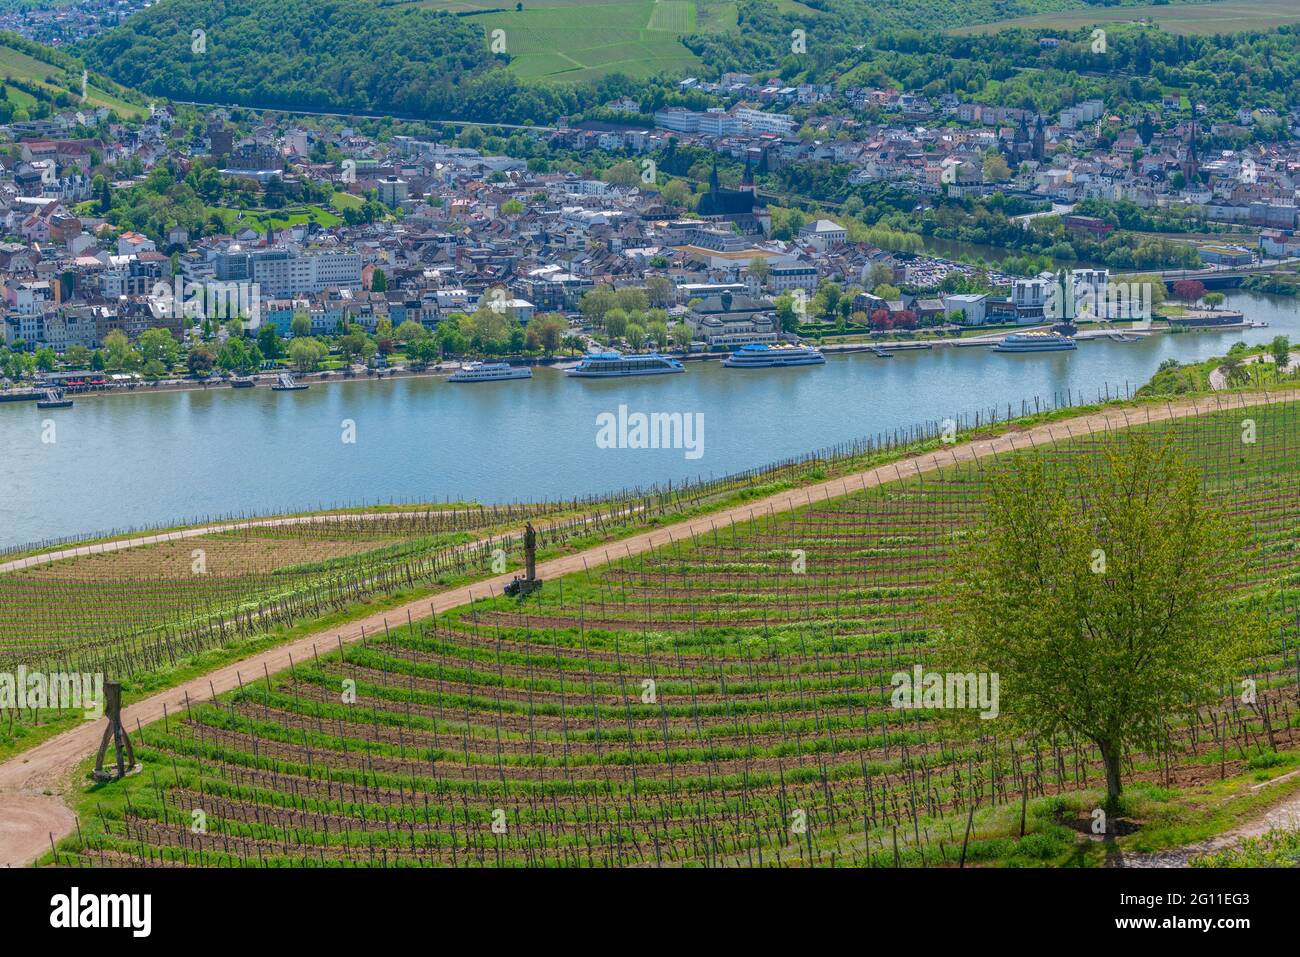 Vineyard and town of Bingen, seen from the Niederwald Monument, Rhine Valley, confluence of Rhine and Nahe RiverRhineland-Palatinate, Germany Stock Photo